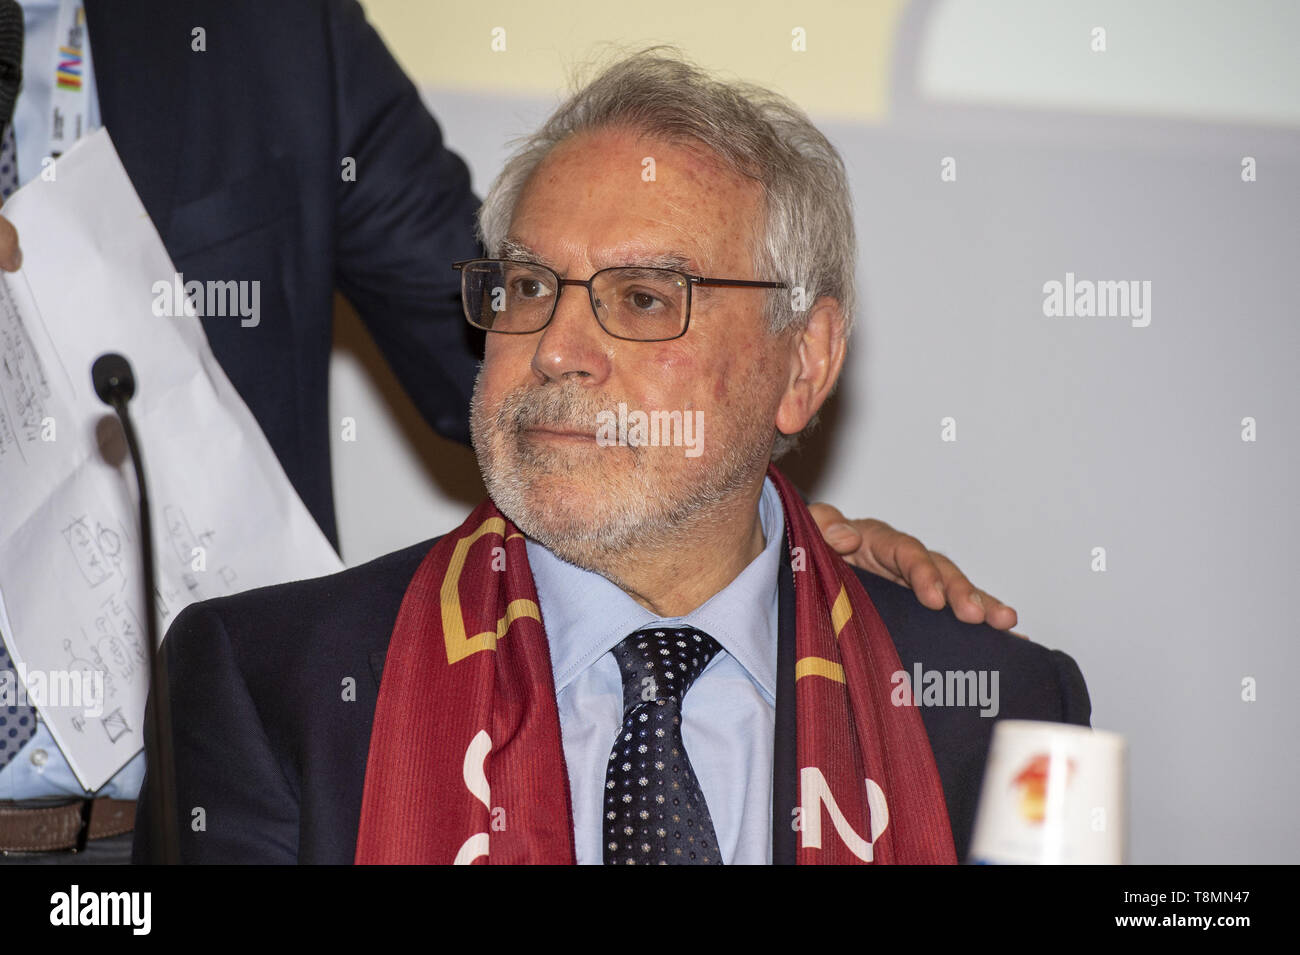 Enzo Siviero, guest during the XXXII Turin International Book Fair at Lingotto Fiere on May 13, 2019 in Turin, Italy. (Photo by Antonio Polia / Pacific Press) Stock Photo